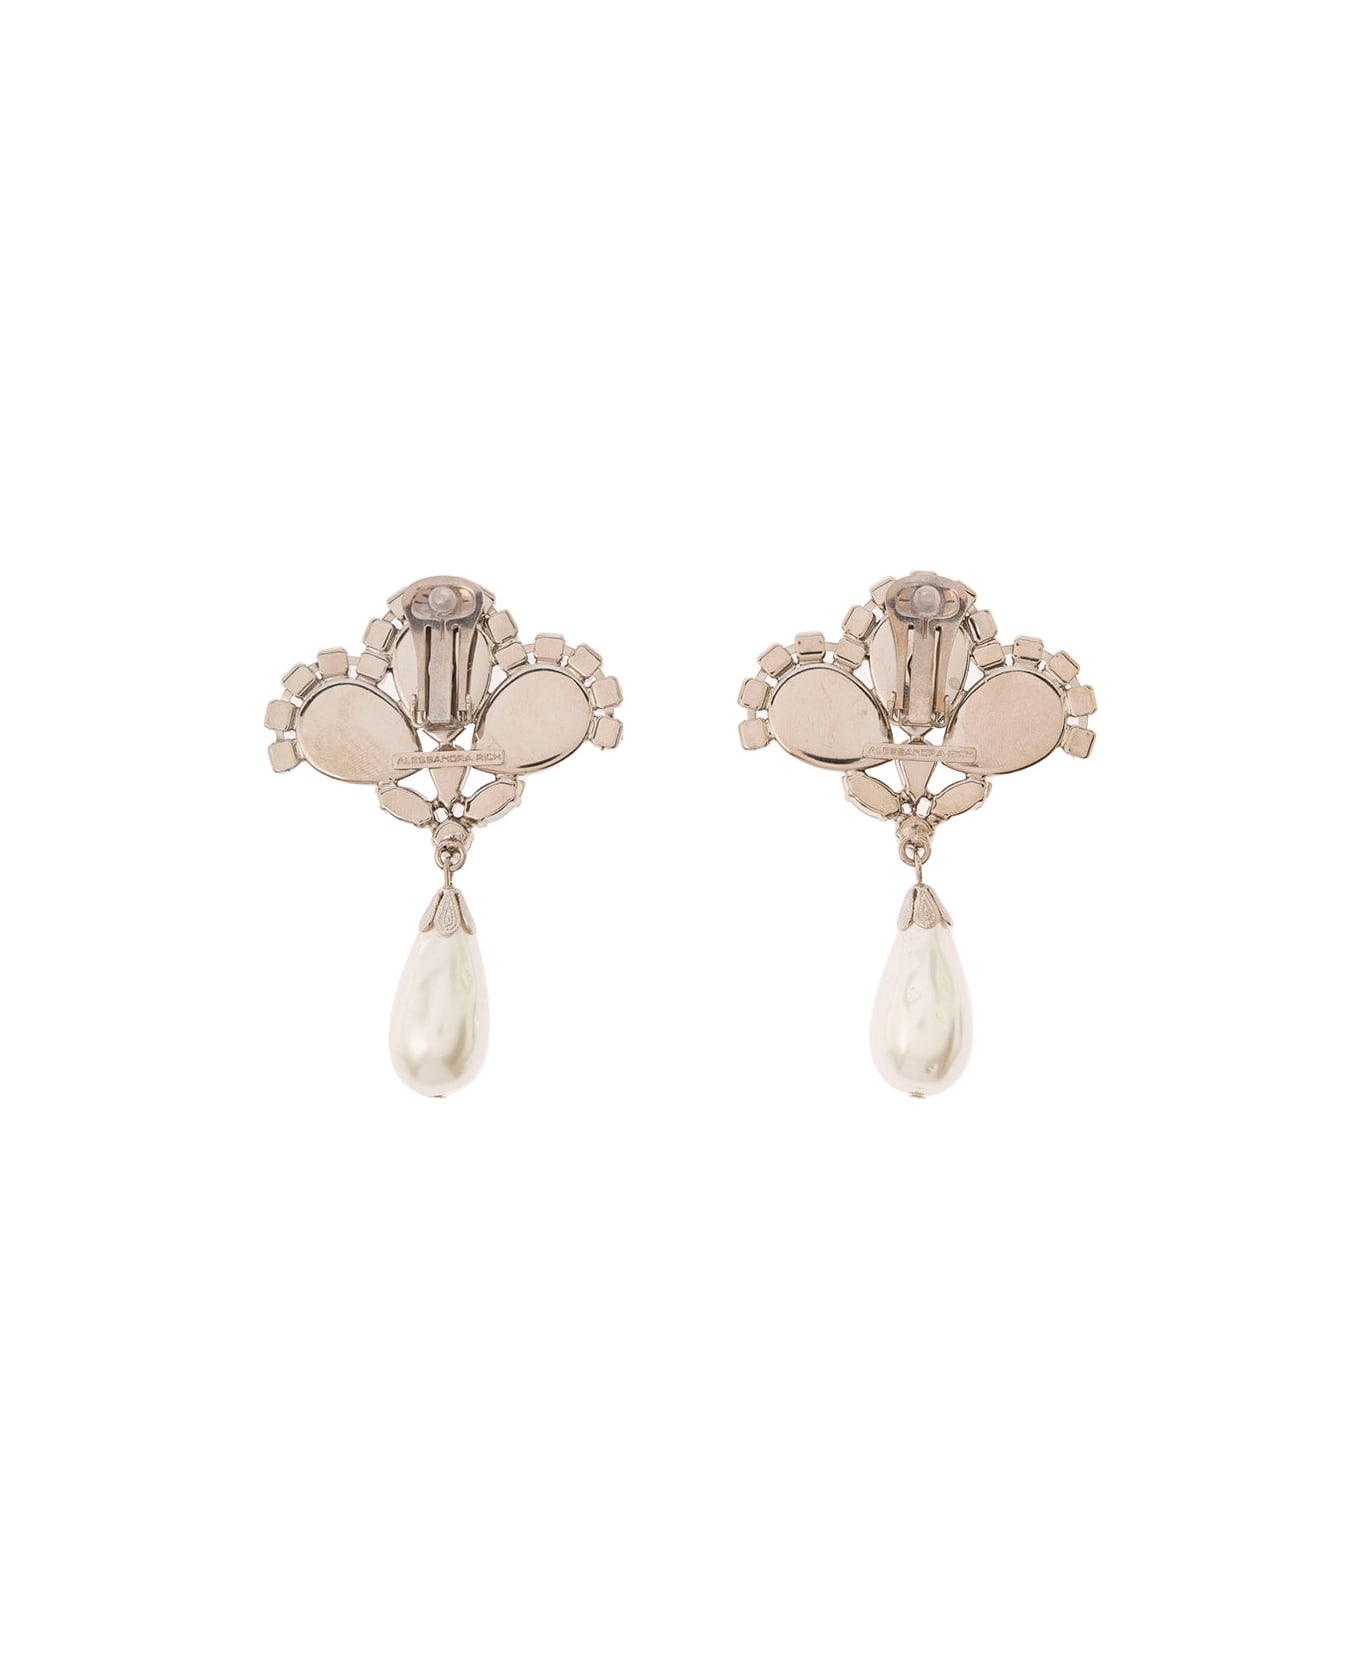 Alessandra Rich Silver-colored Clip-on Crystal Earrings With Pendant Pearl In Hypoallergenic Brass Woman - Metallic イヤリング